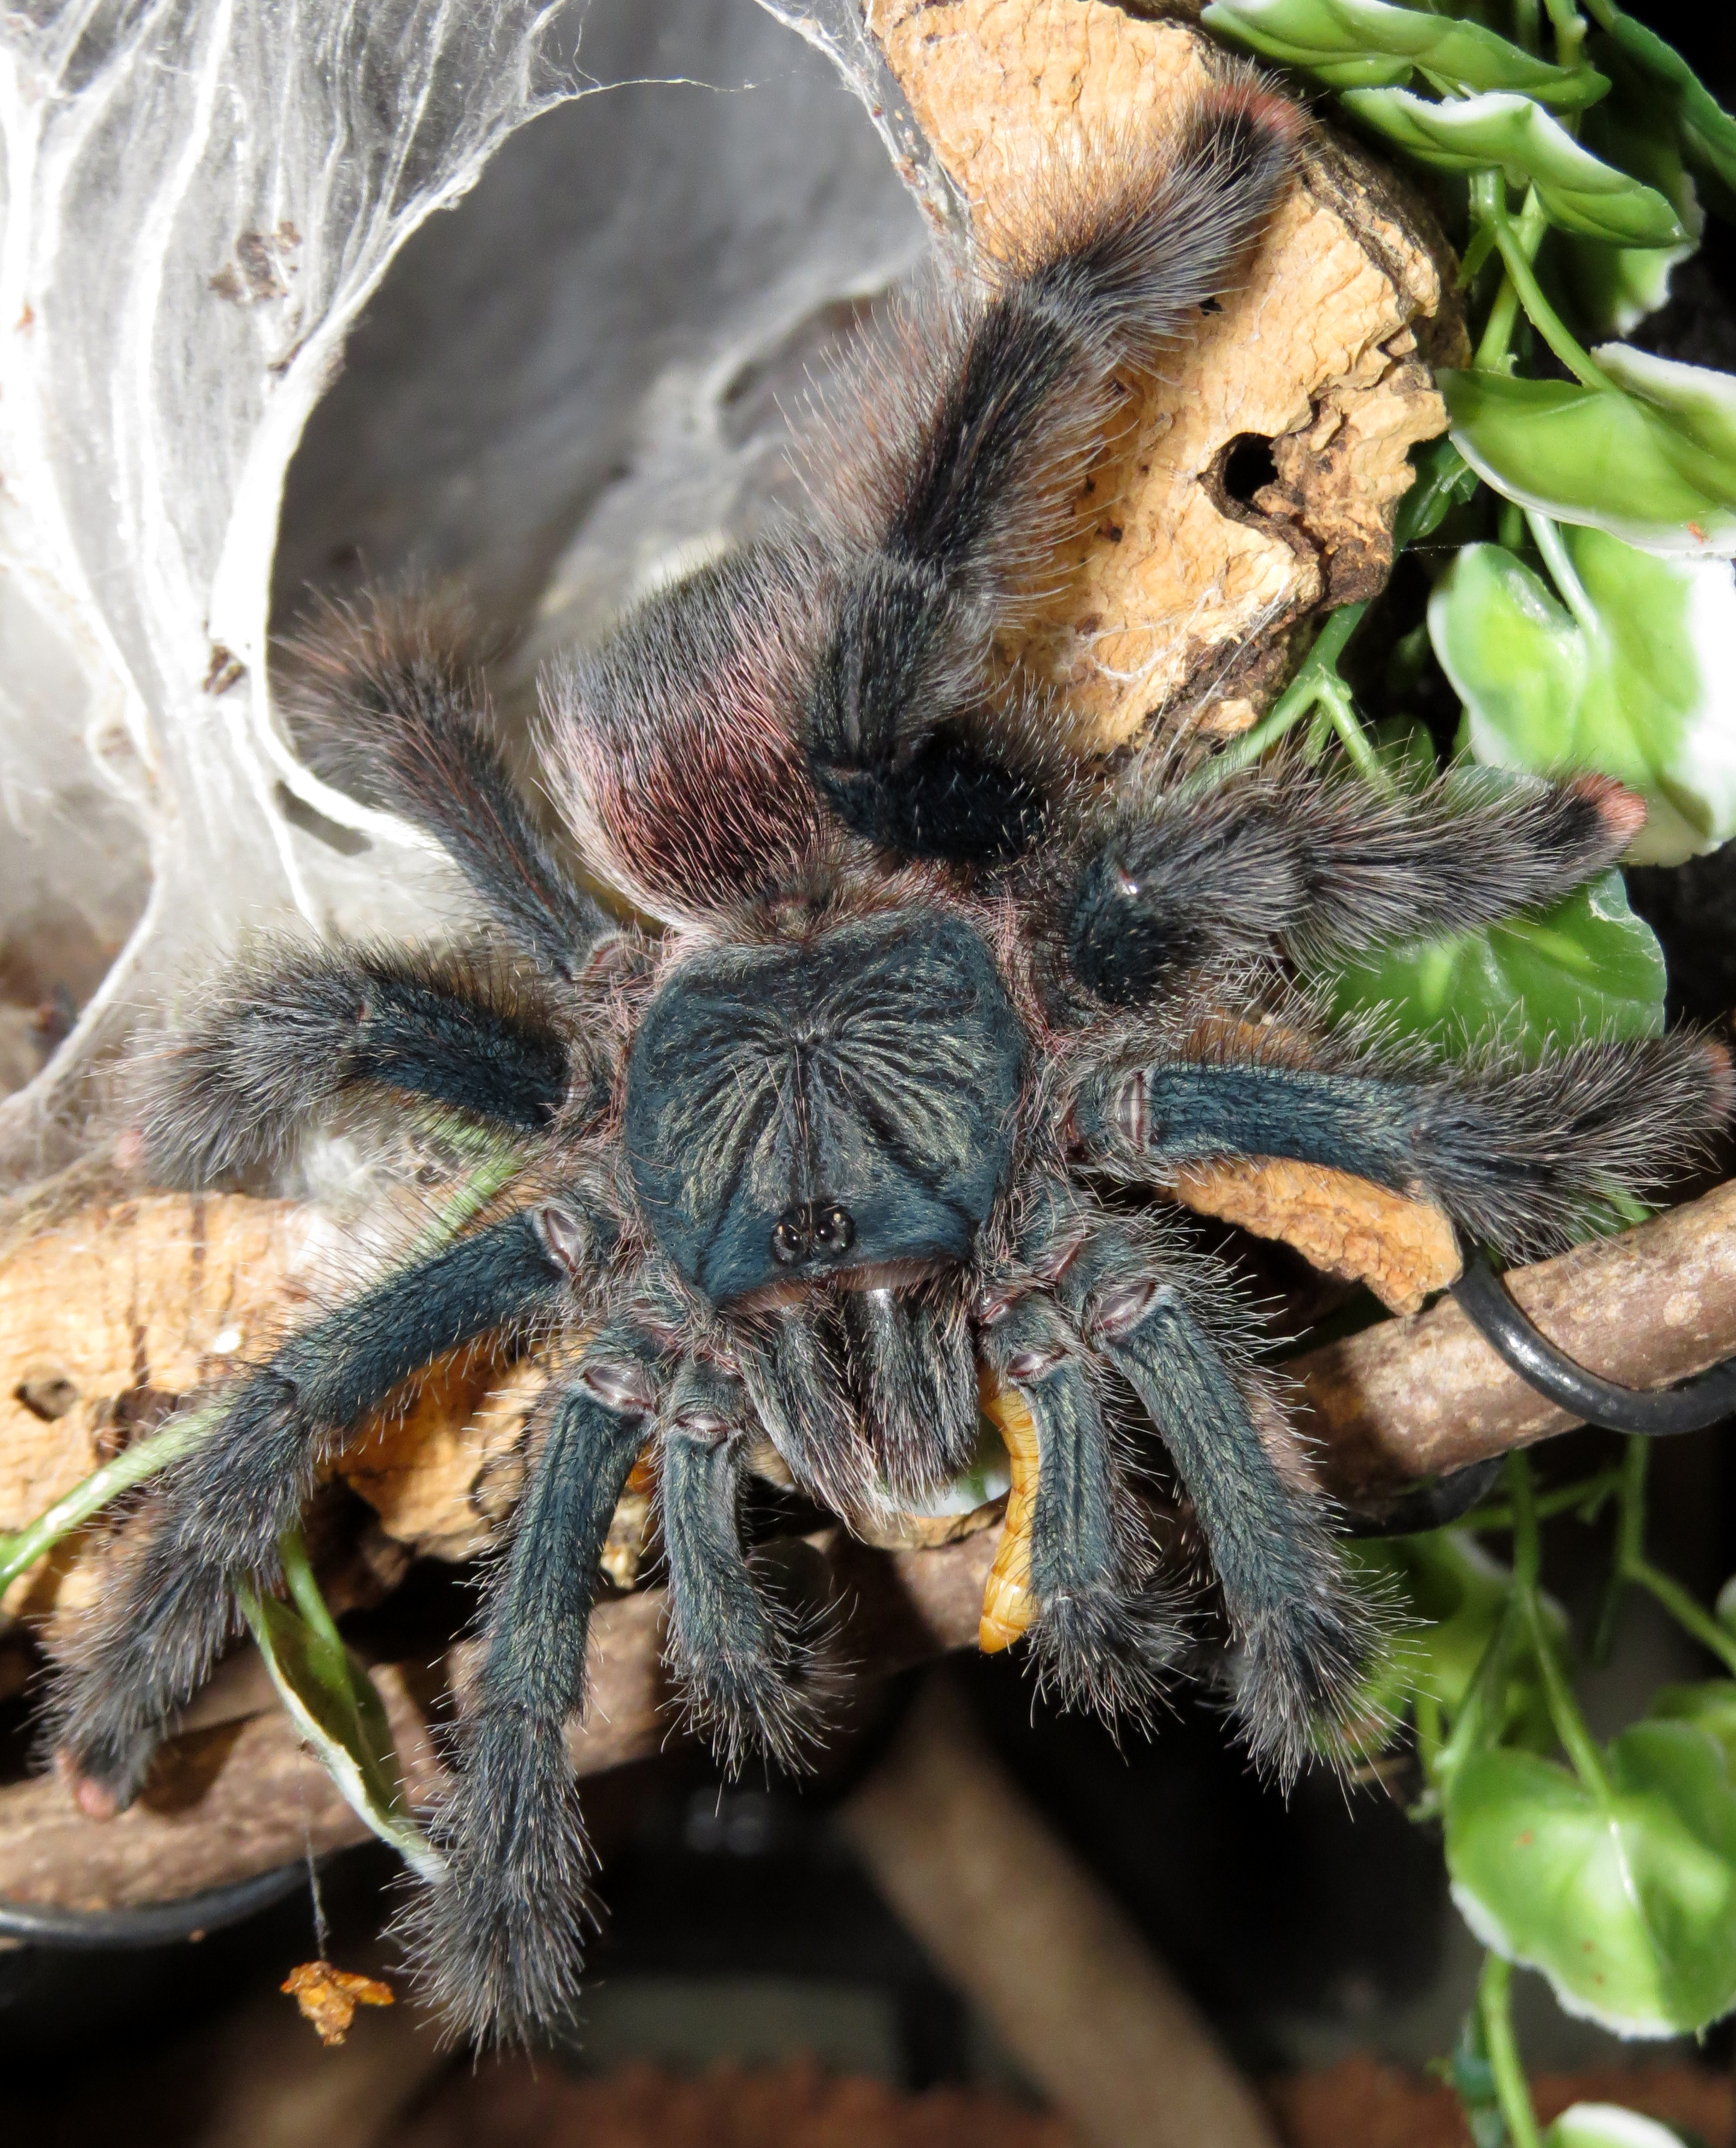 Skyler and the Worm (♀ Avicularia avicularia 5") [3/3]